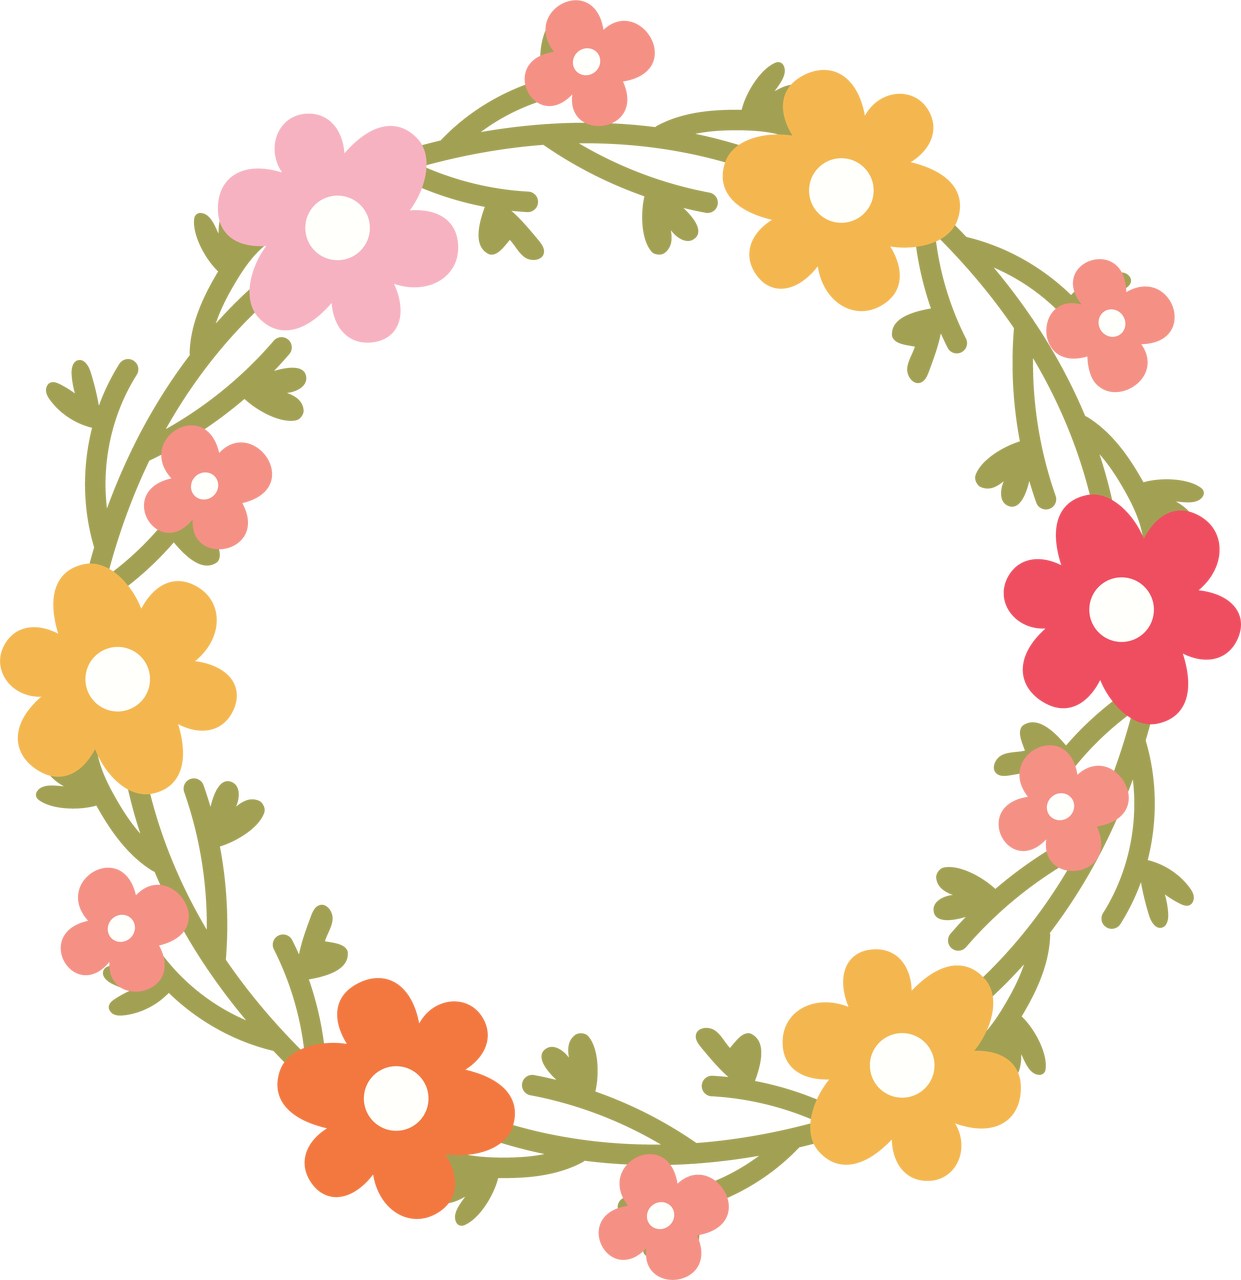 Flower Reef Svg - 618+ Crafter Files - Convert SVG to PNG online